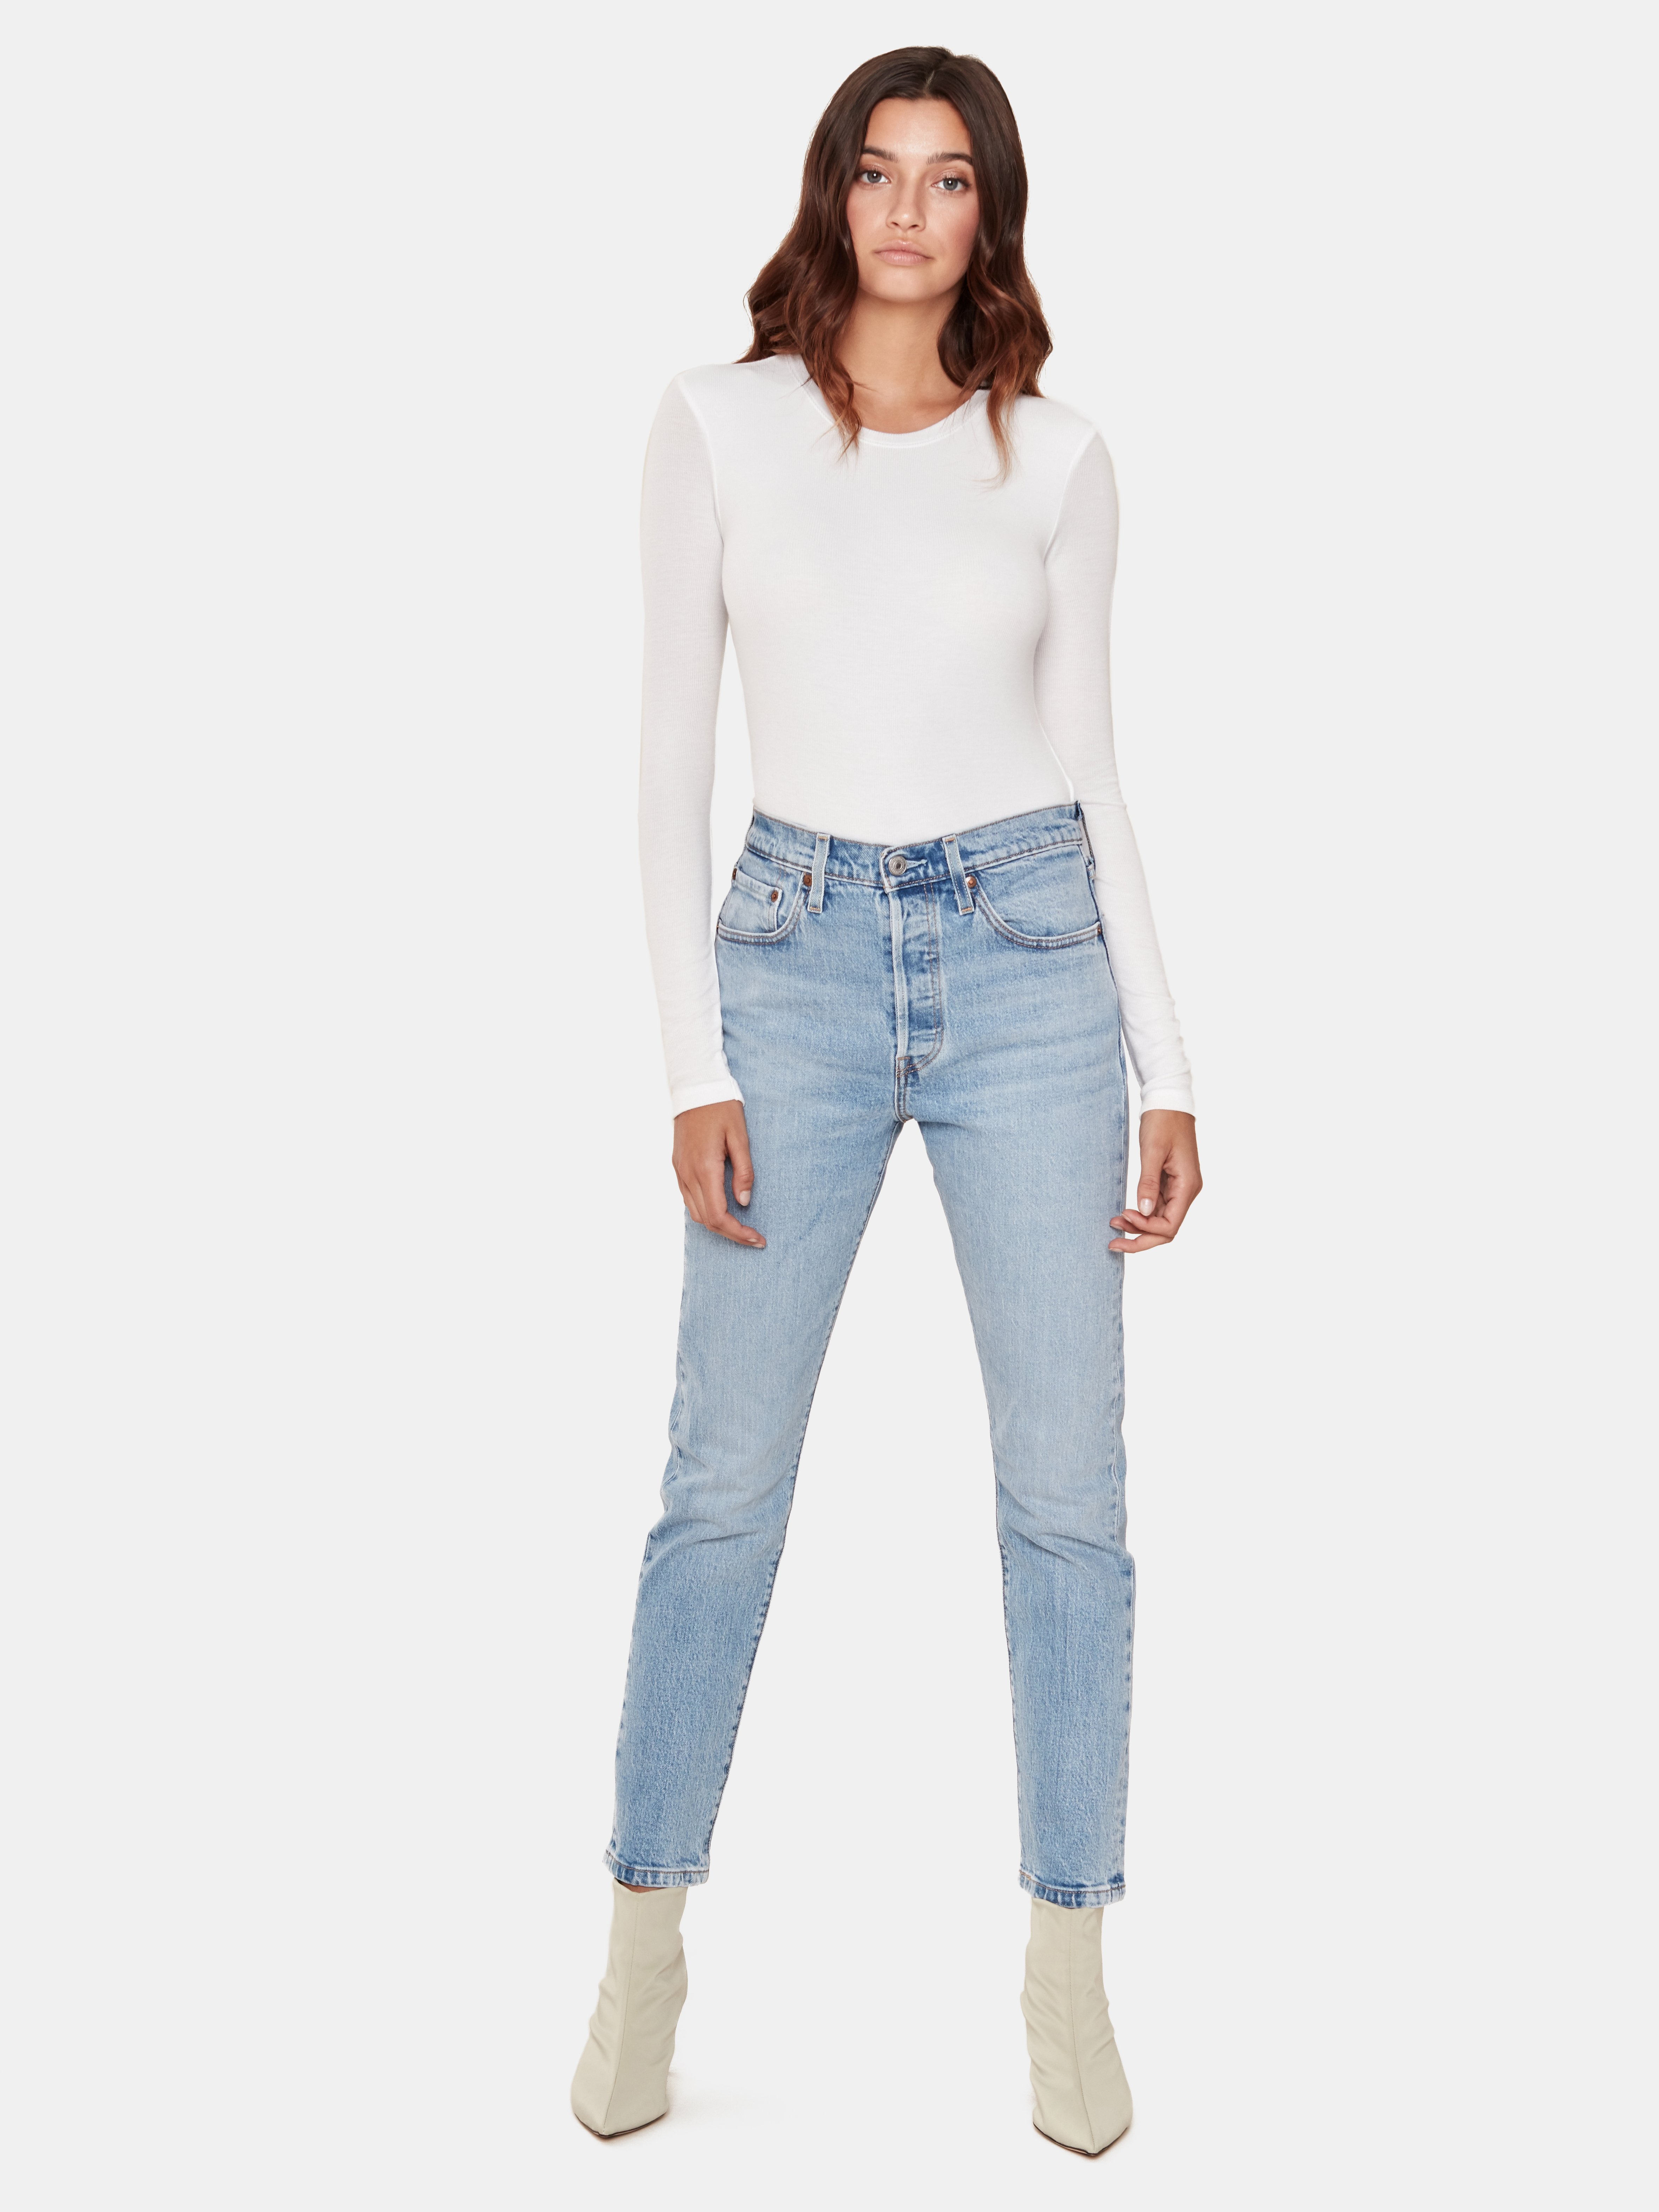 Levi's 501 High Rise Ankle Cut Skinny 